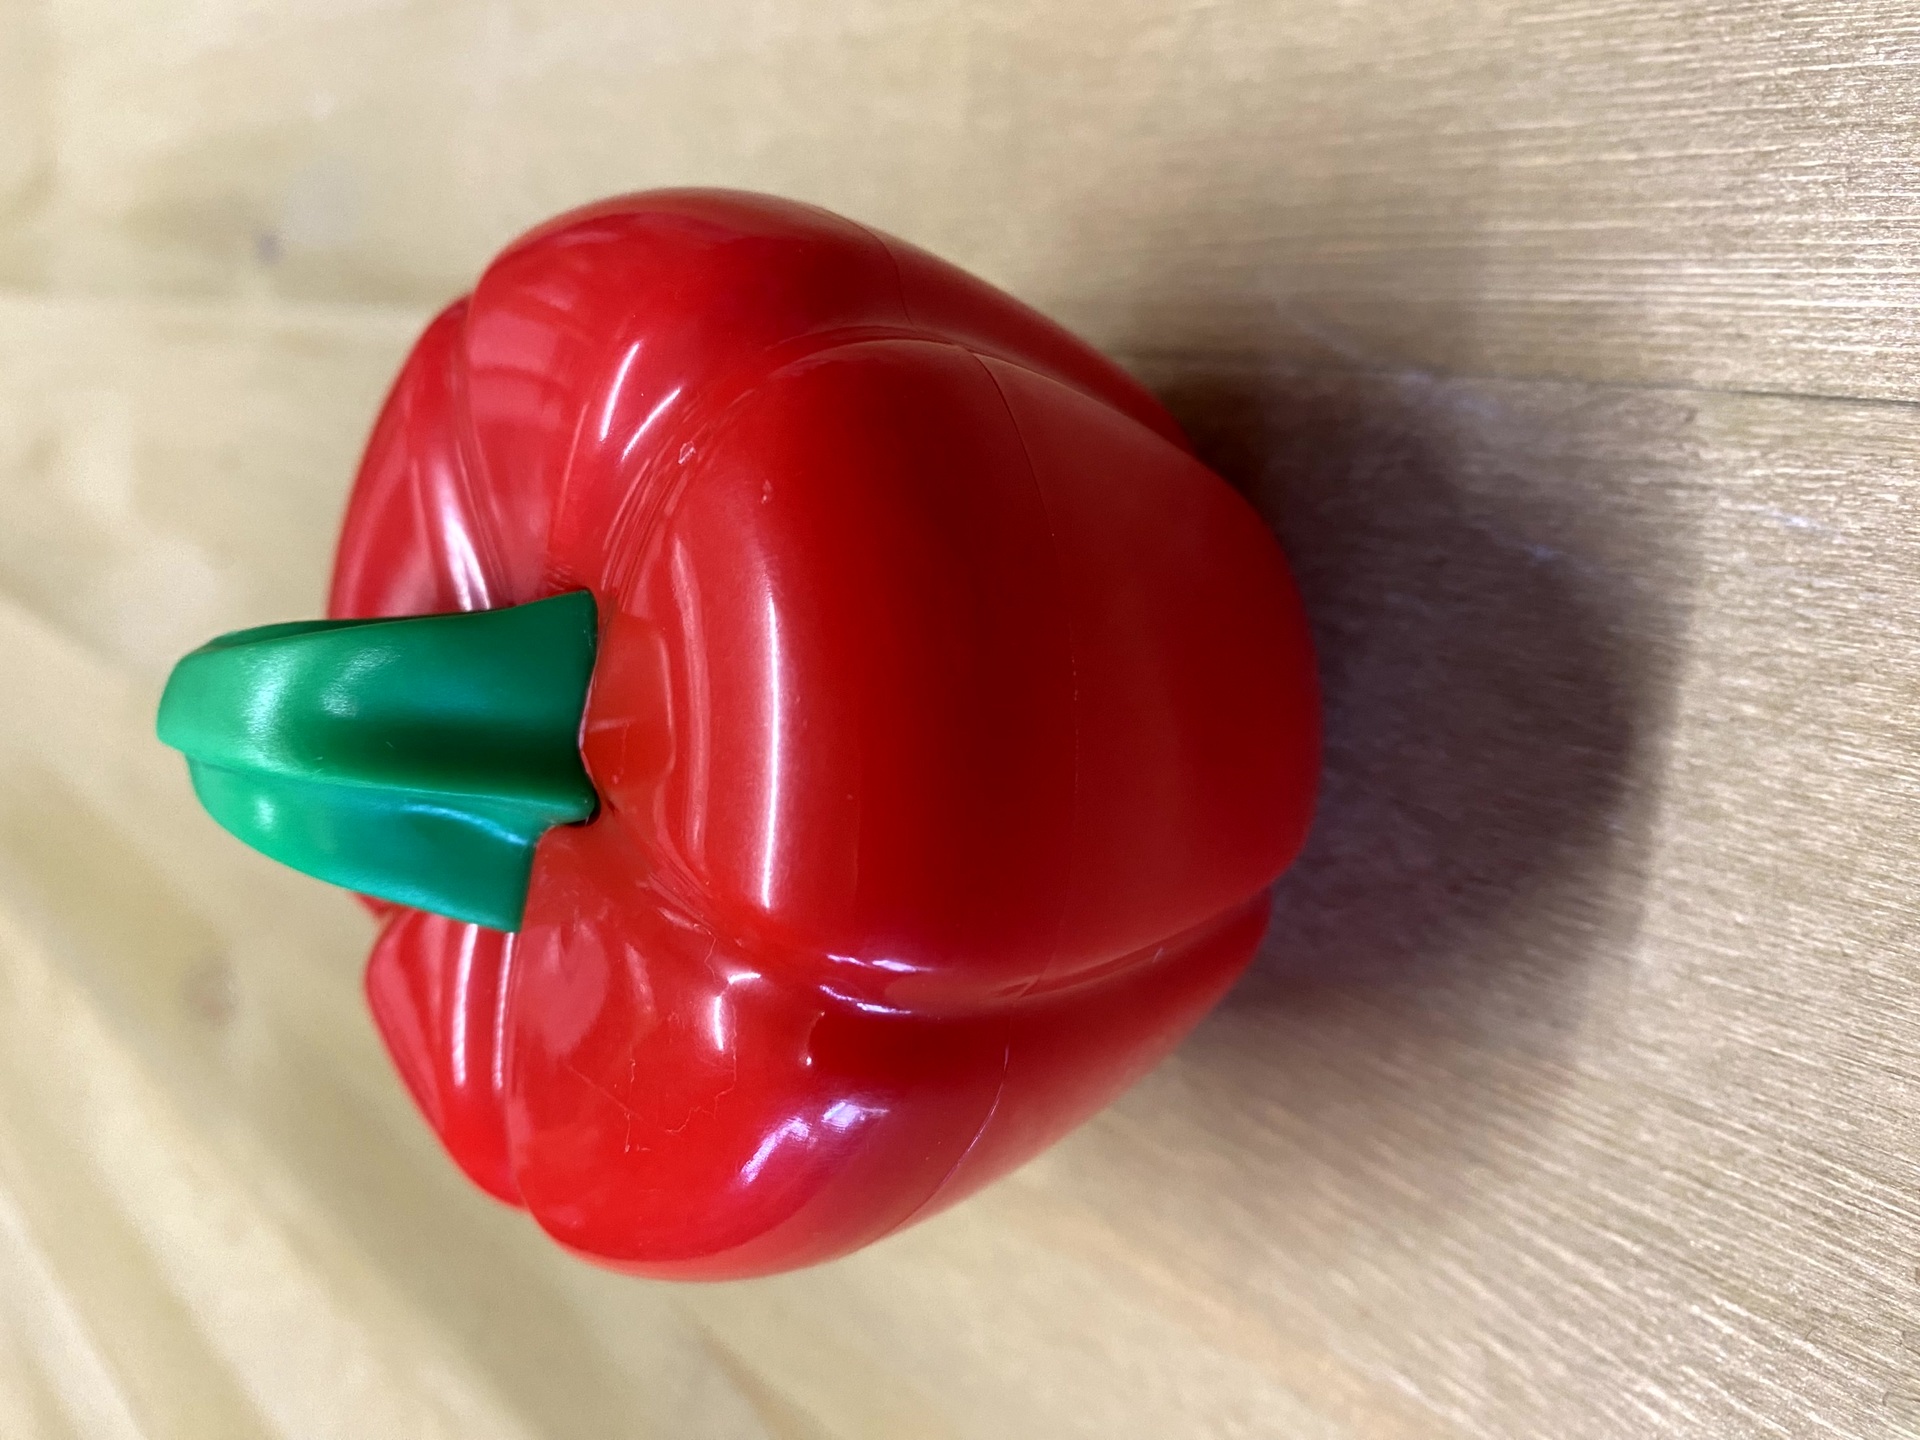 Red Pepper Image